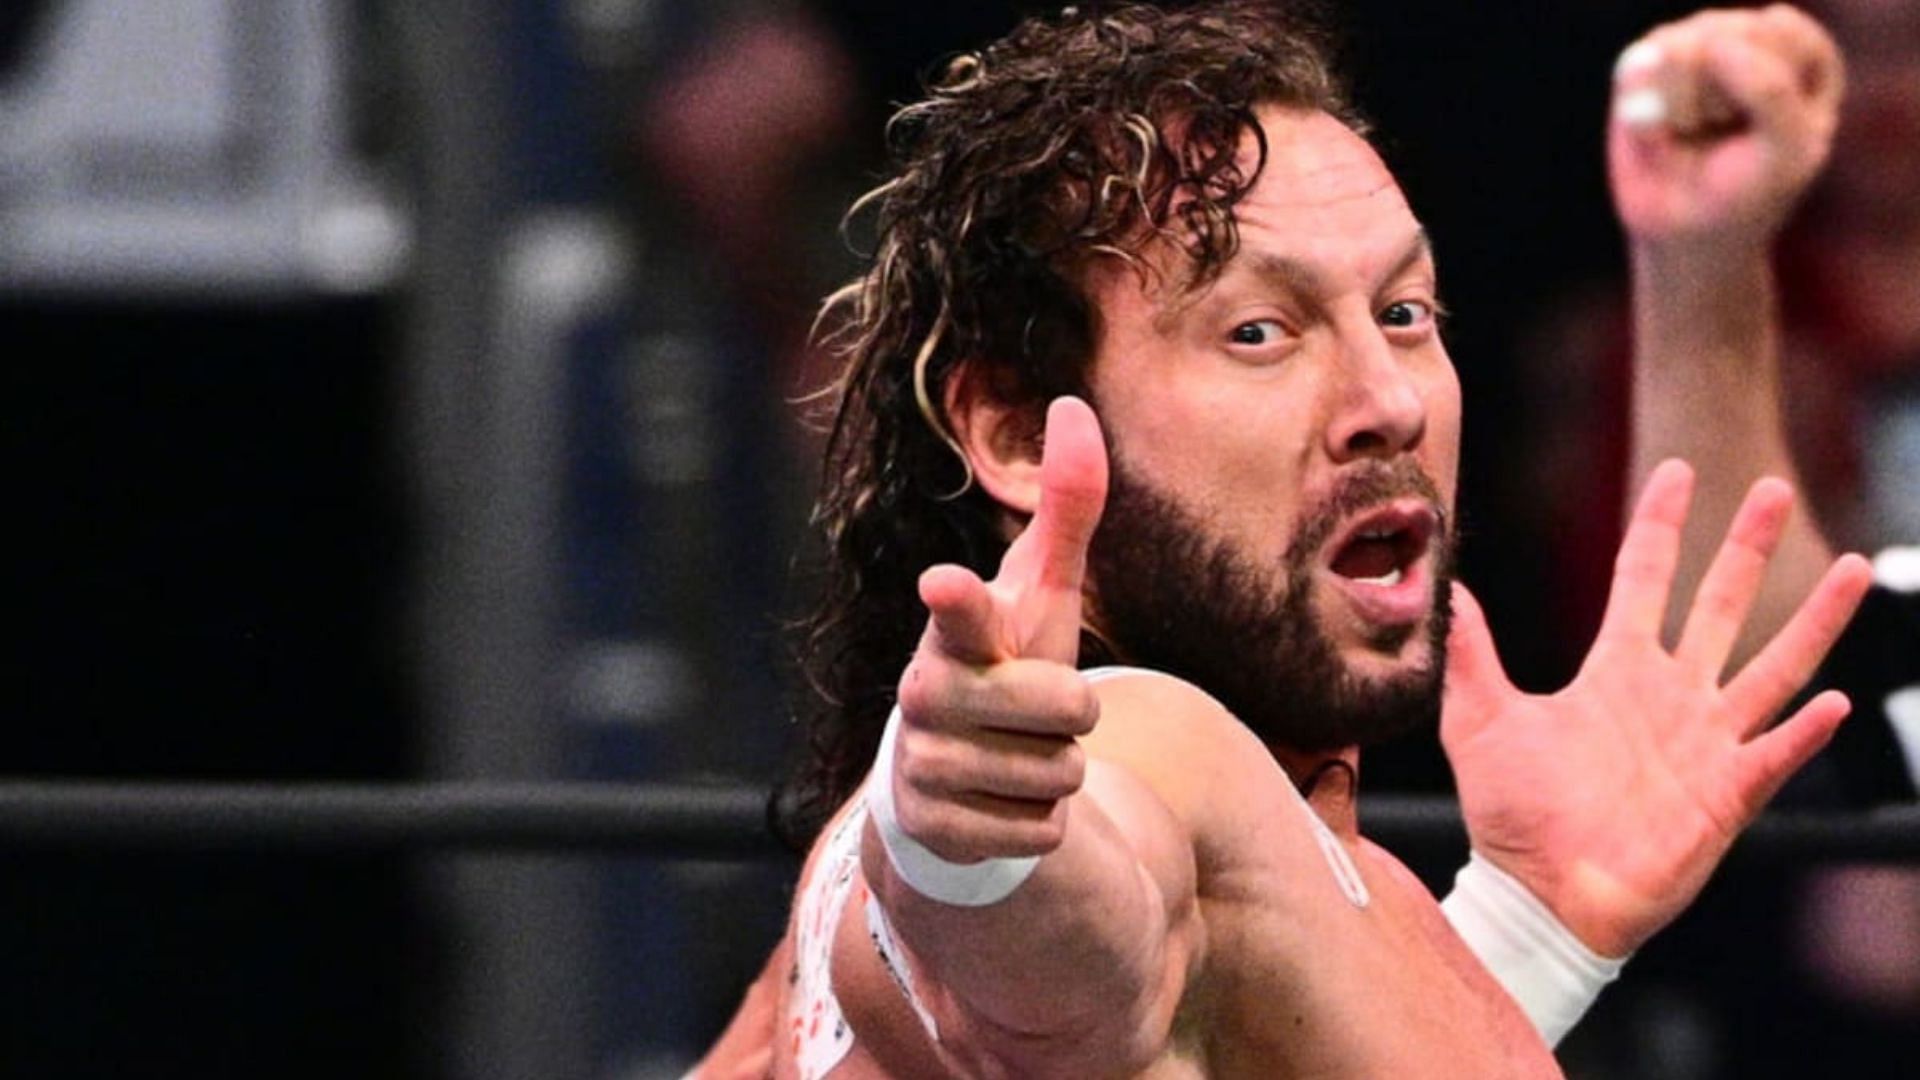 What could be next for Kenny Omega?